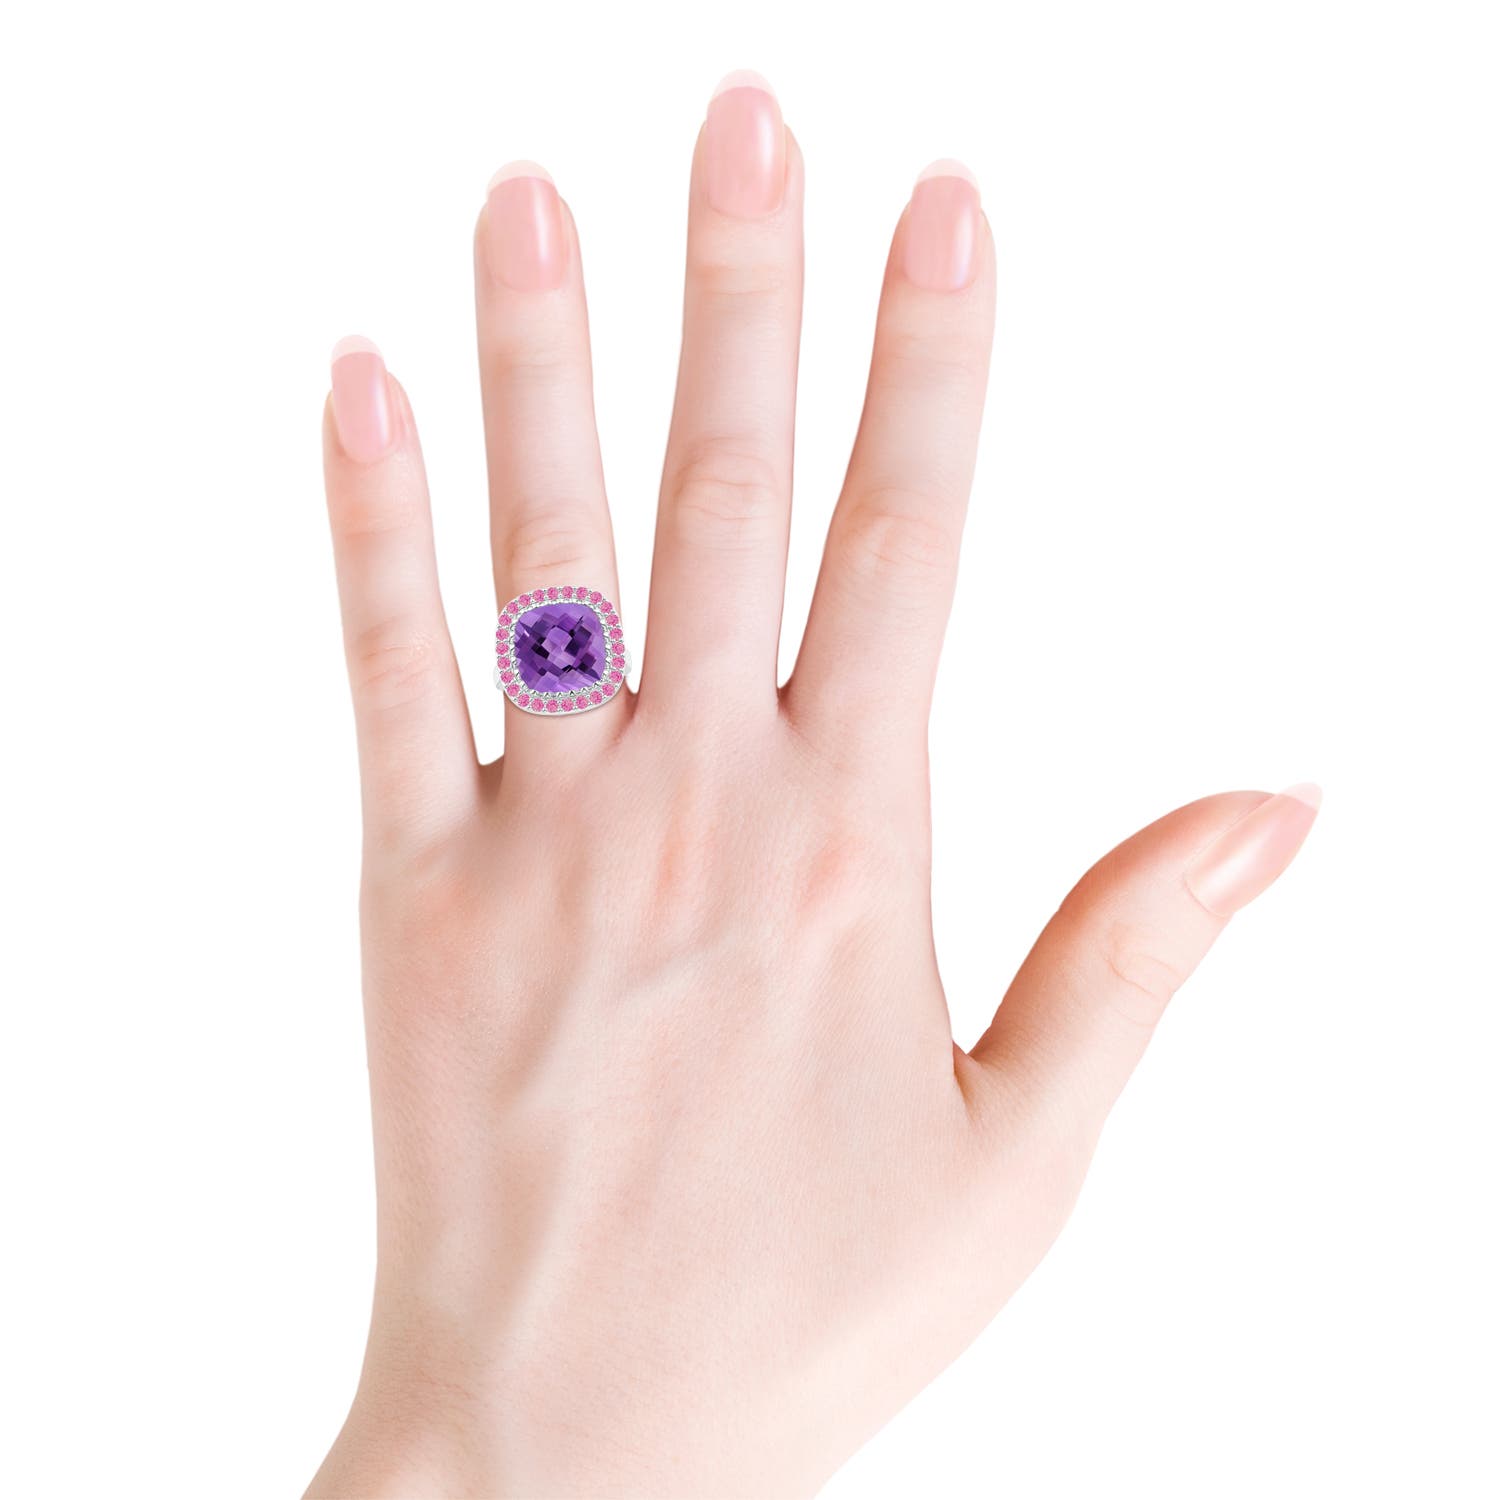 AA - Amethyst / 6.98 CT / 14 KT White Gold